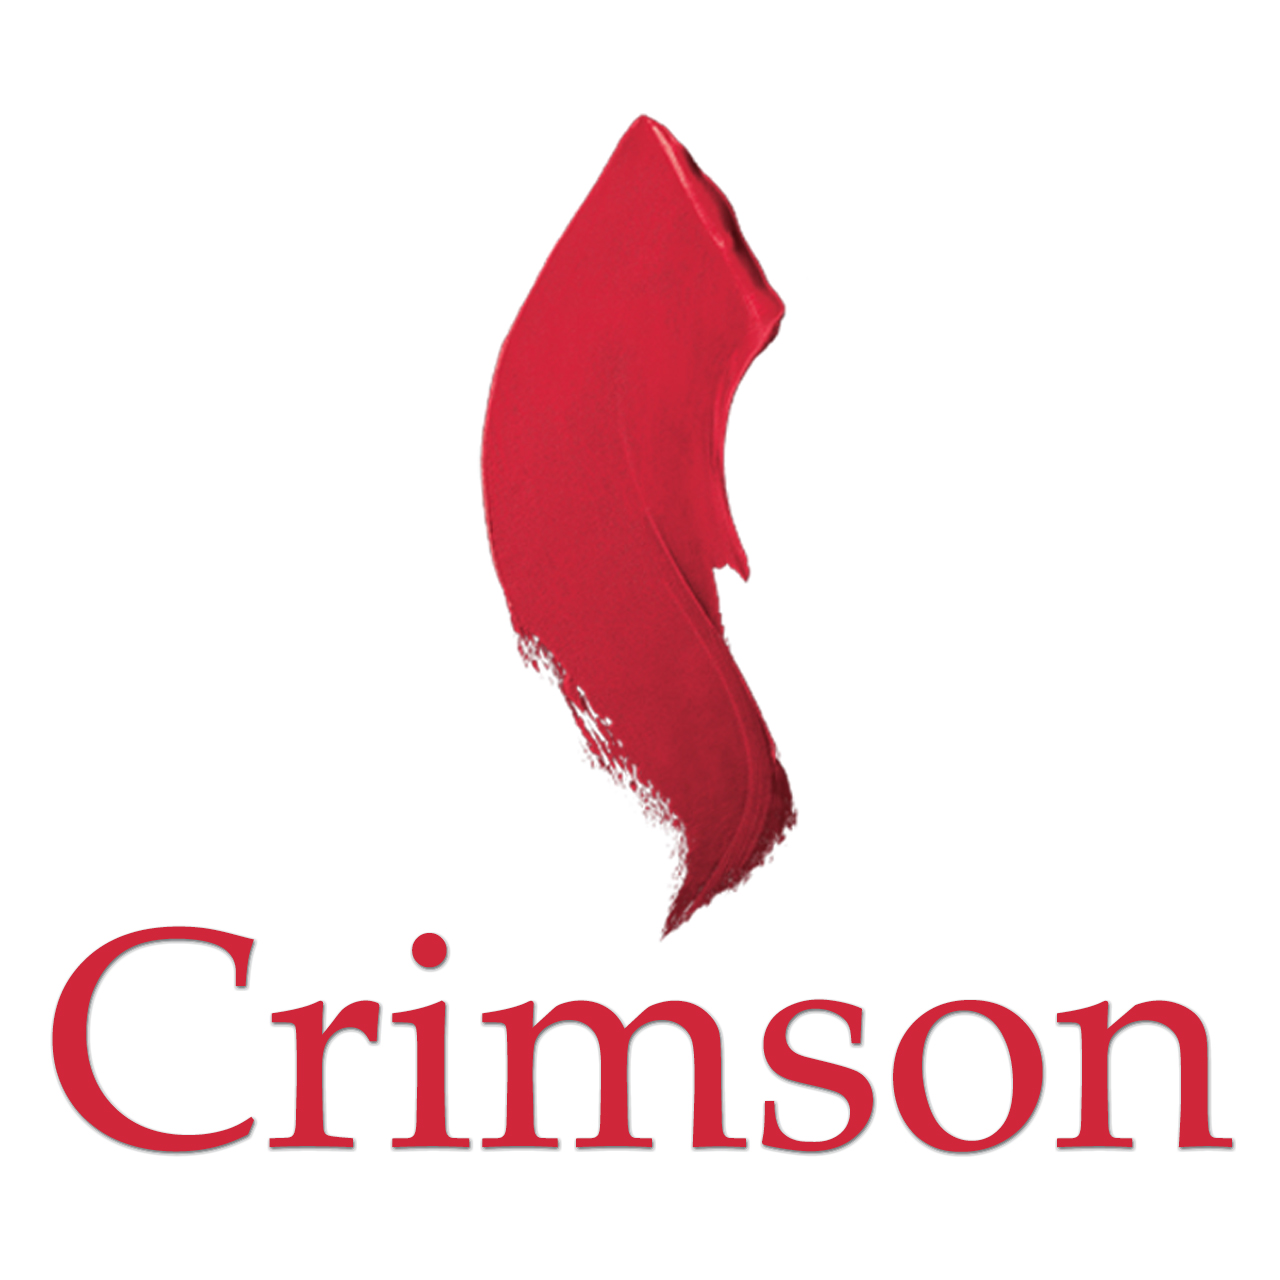 Crimson: Miracle of Miracles